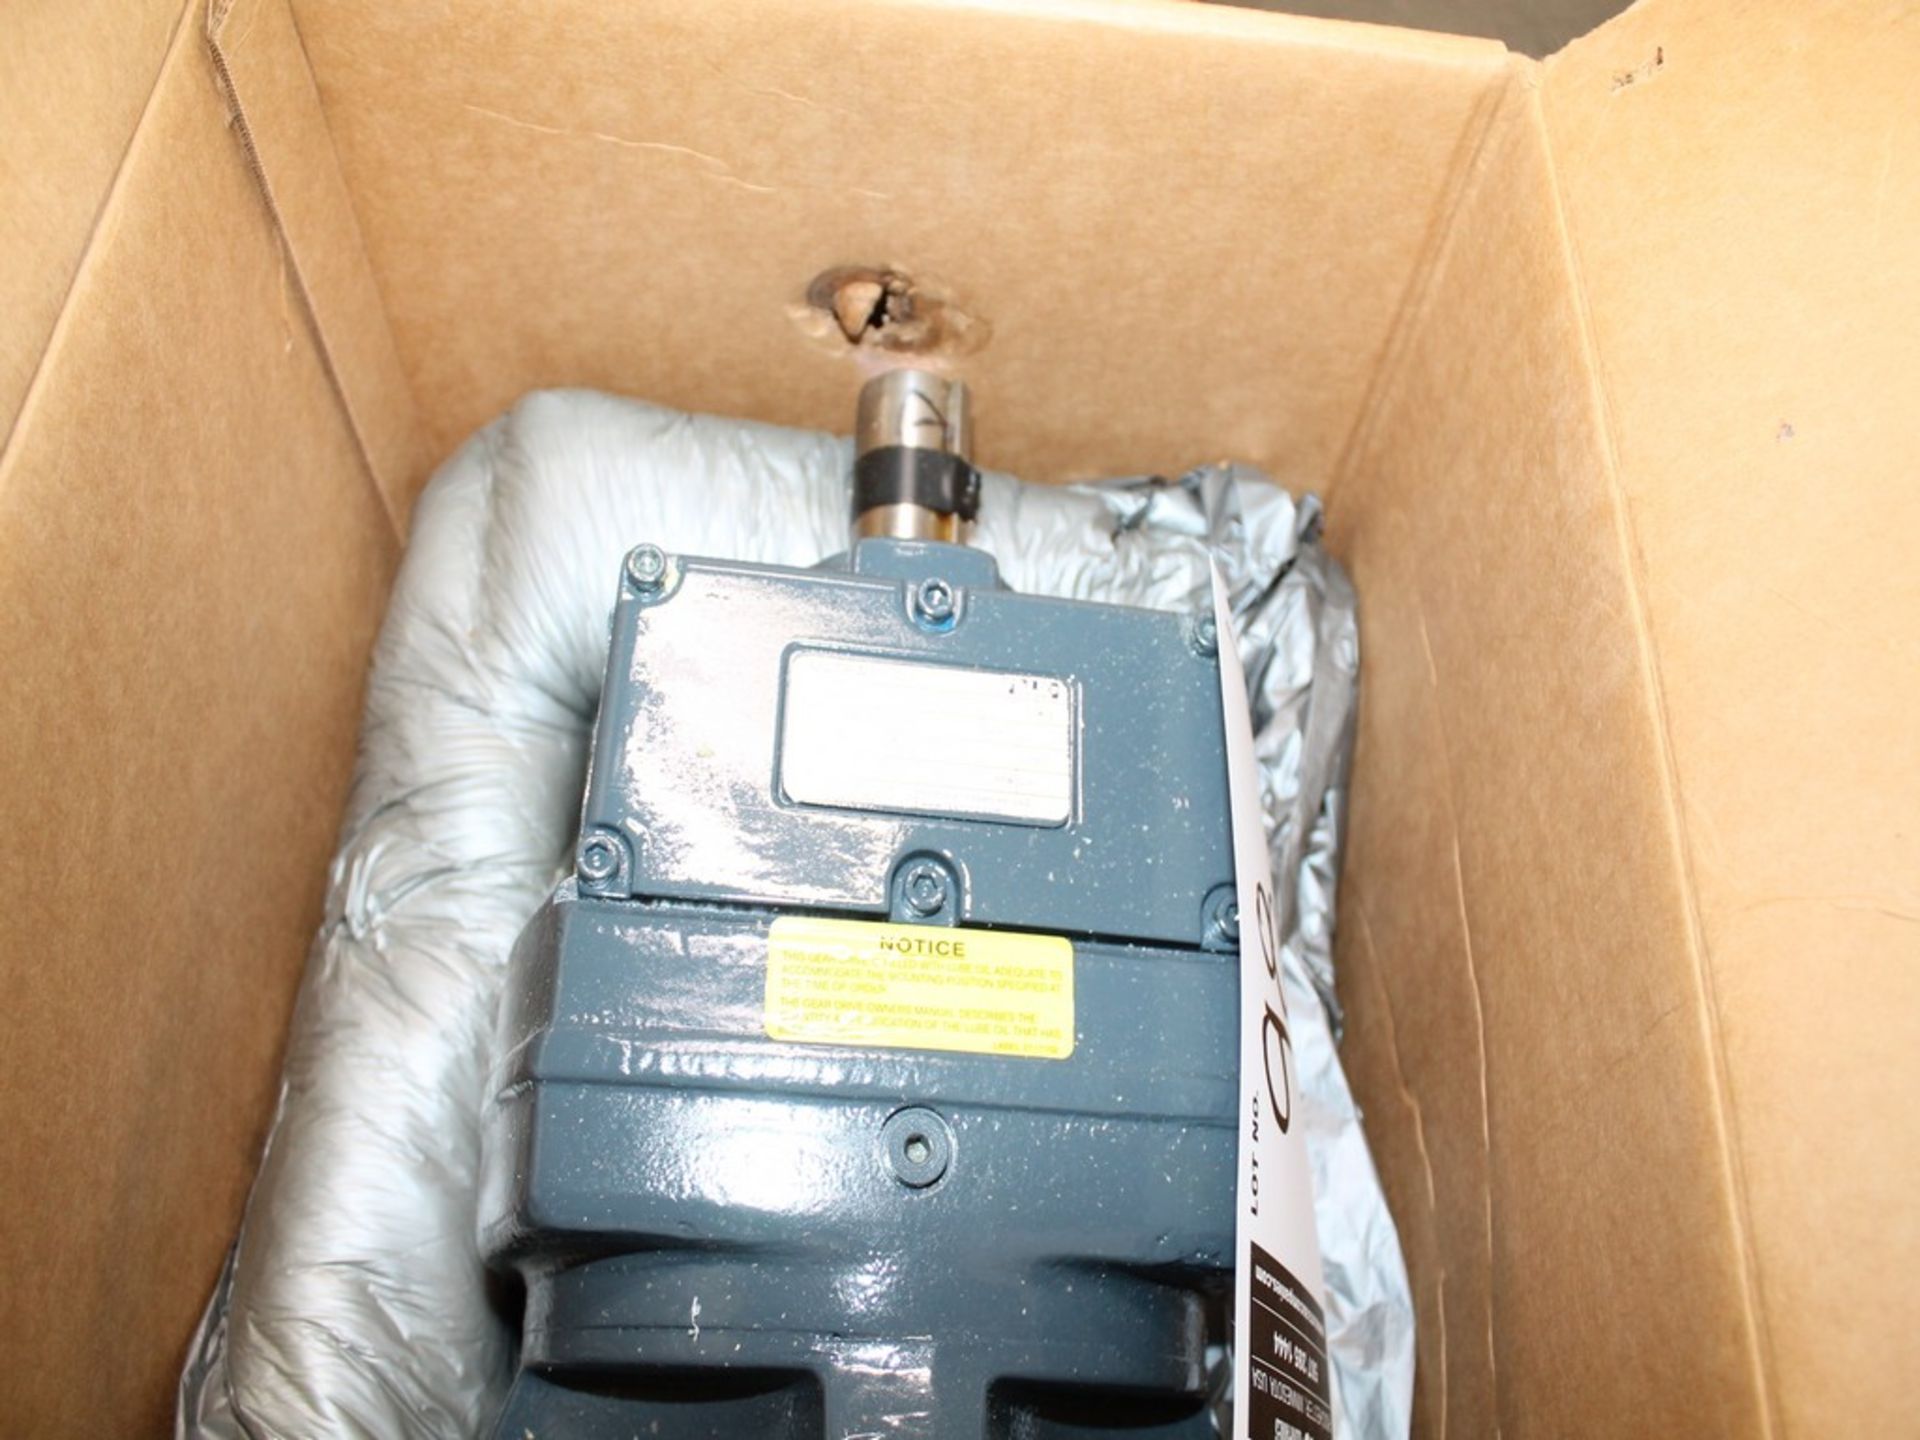 LOT CONTENTS OF PALLET WITH MISCELLANEOUS PUMPS, GAUGES, VALVES, METERS - Image 12 of 12